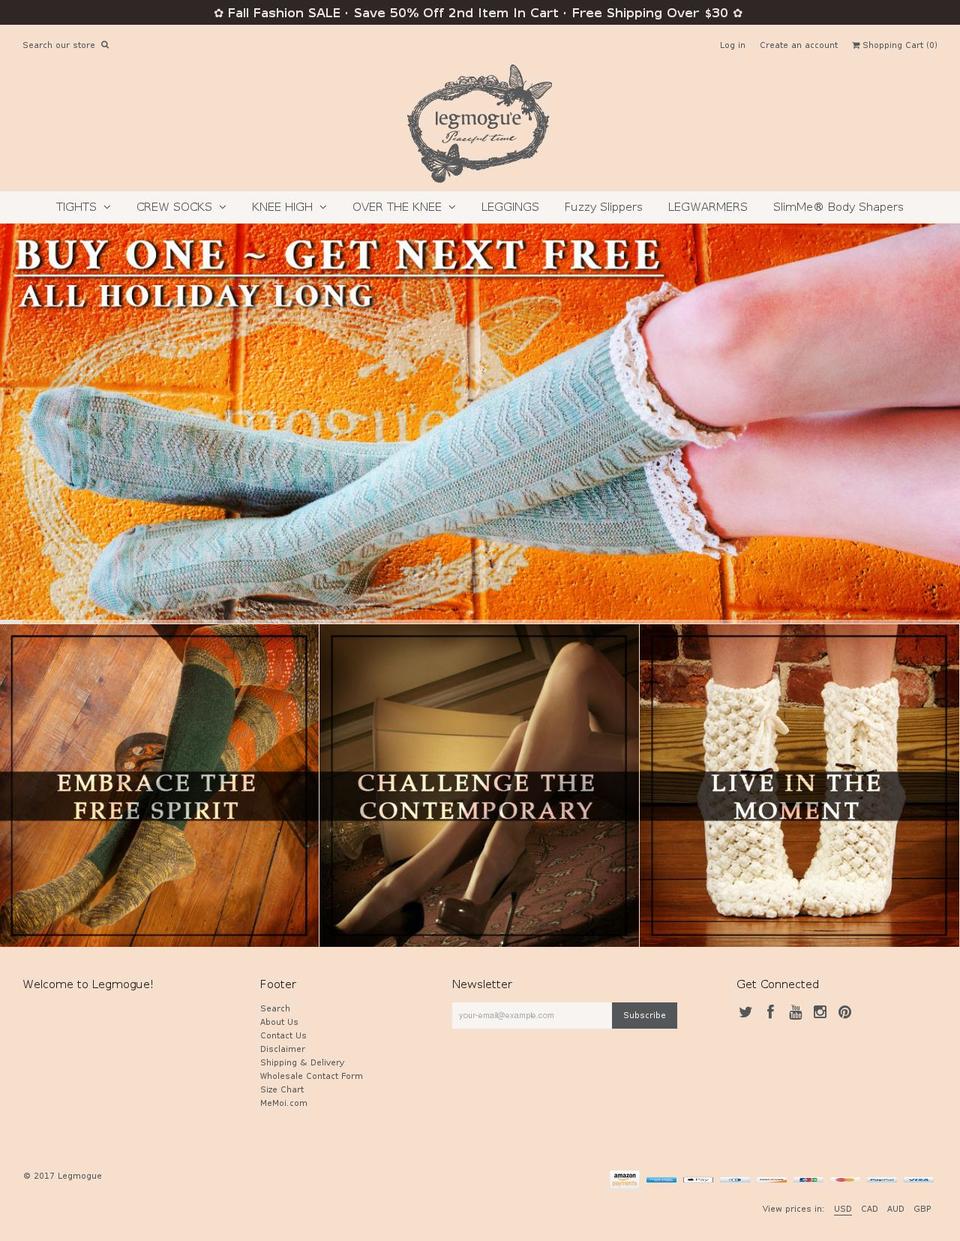 Weekend Shopify theme site example legmogue.us